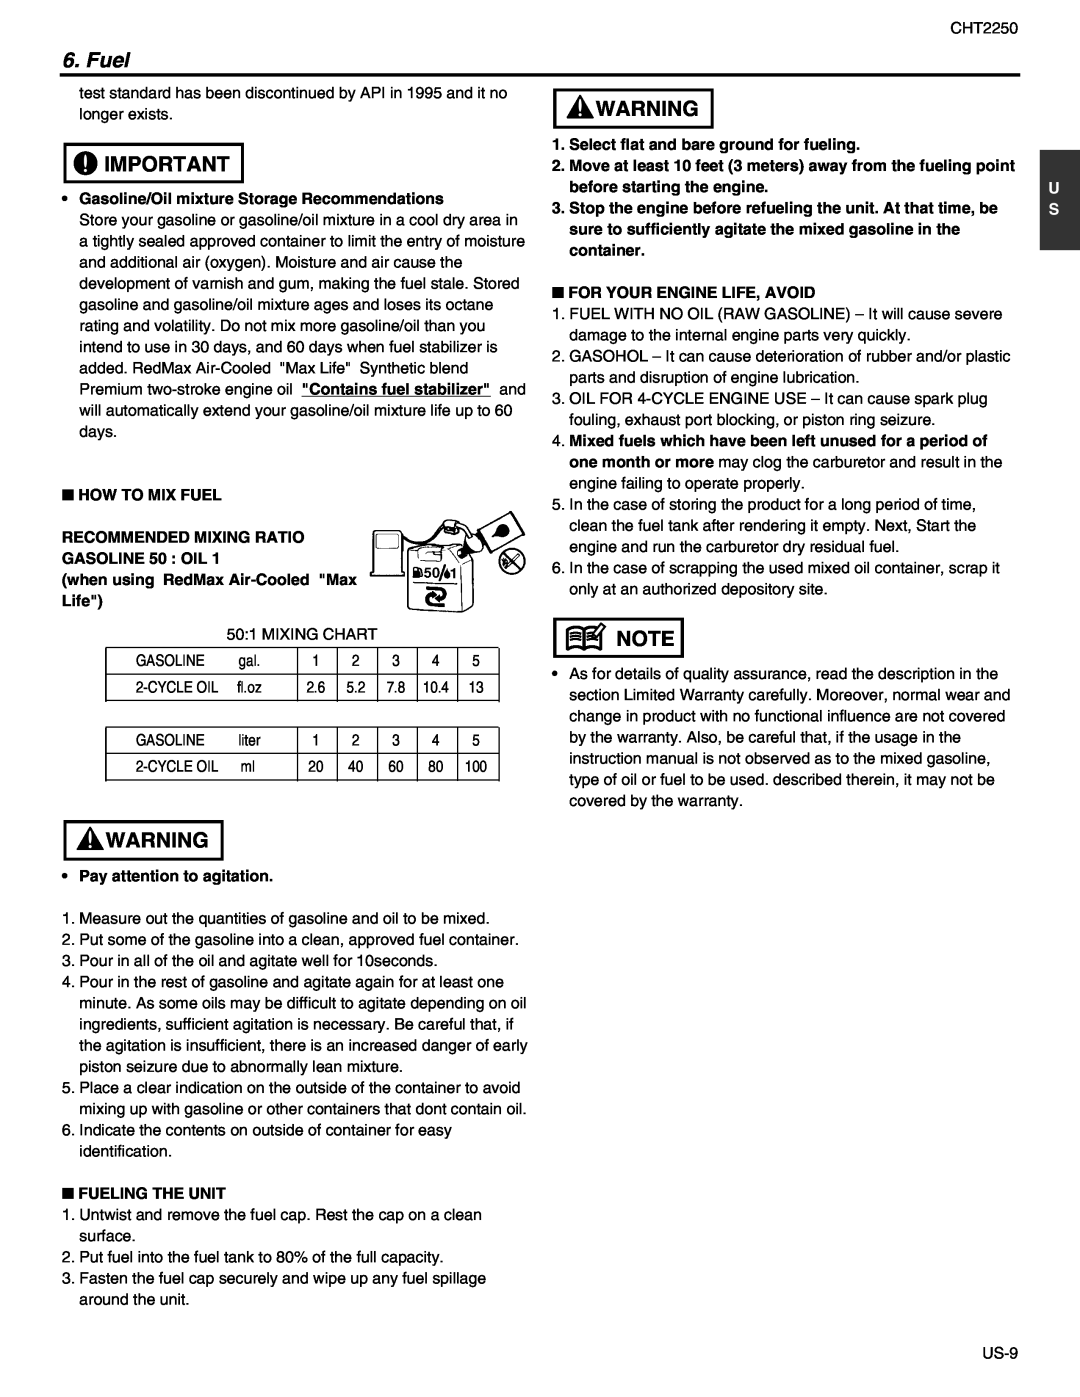 RedMax CHT2250 manual Fuel, Gasoline/Oil mixture Storage Recommendations 